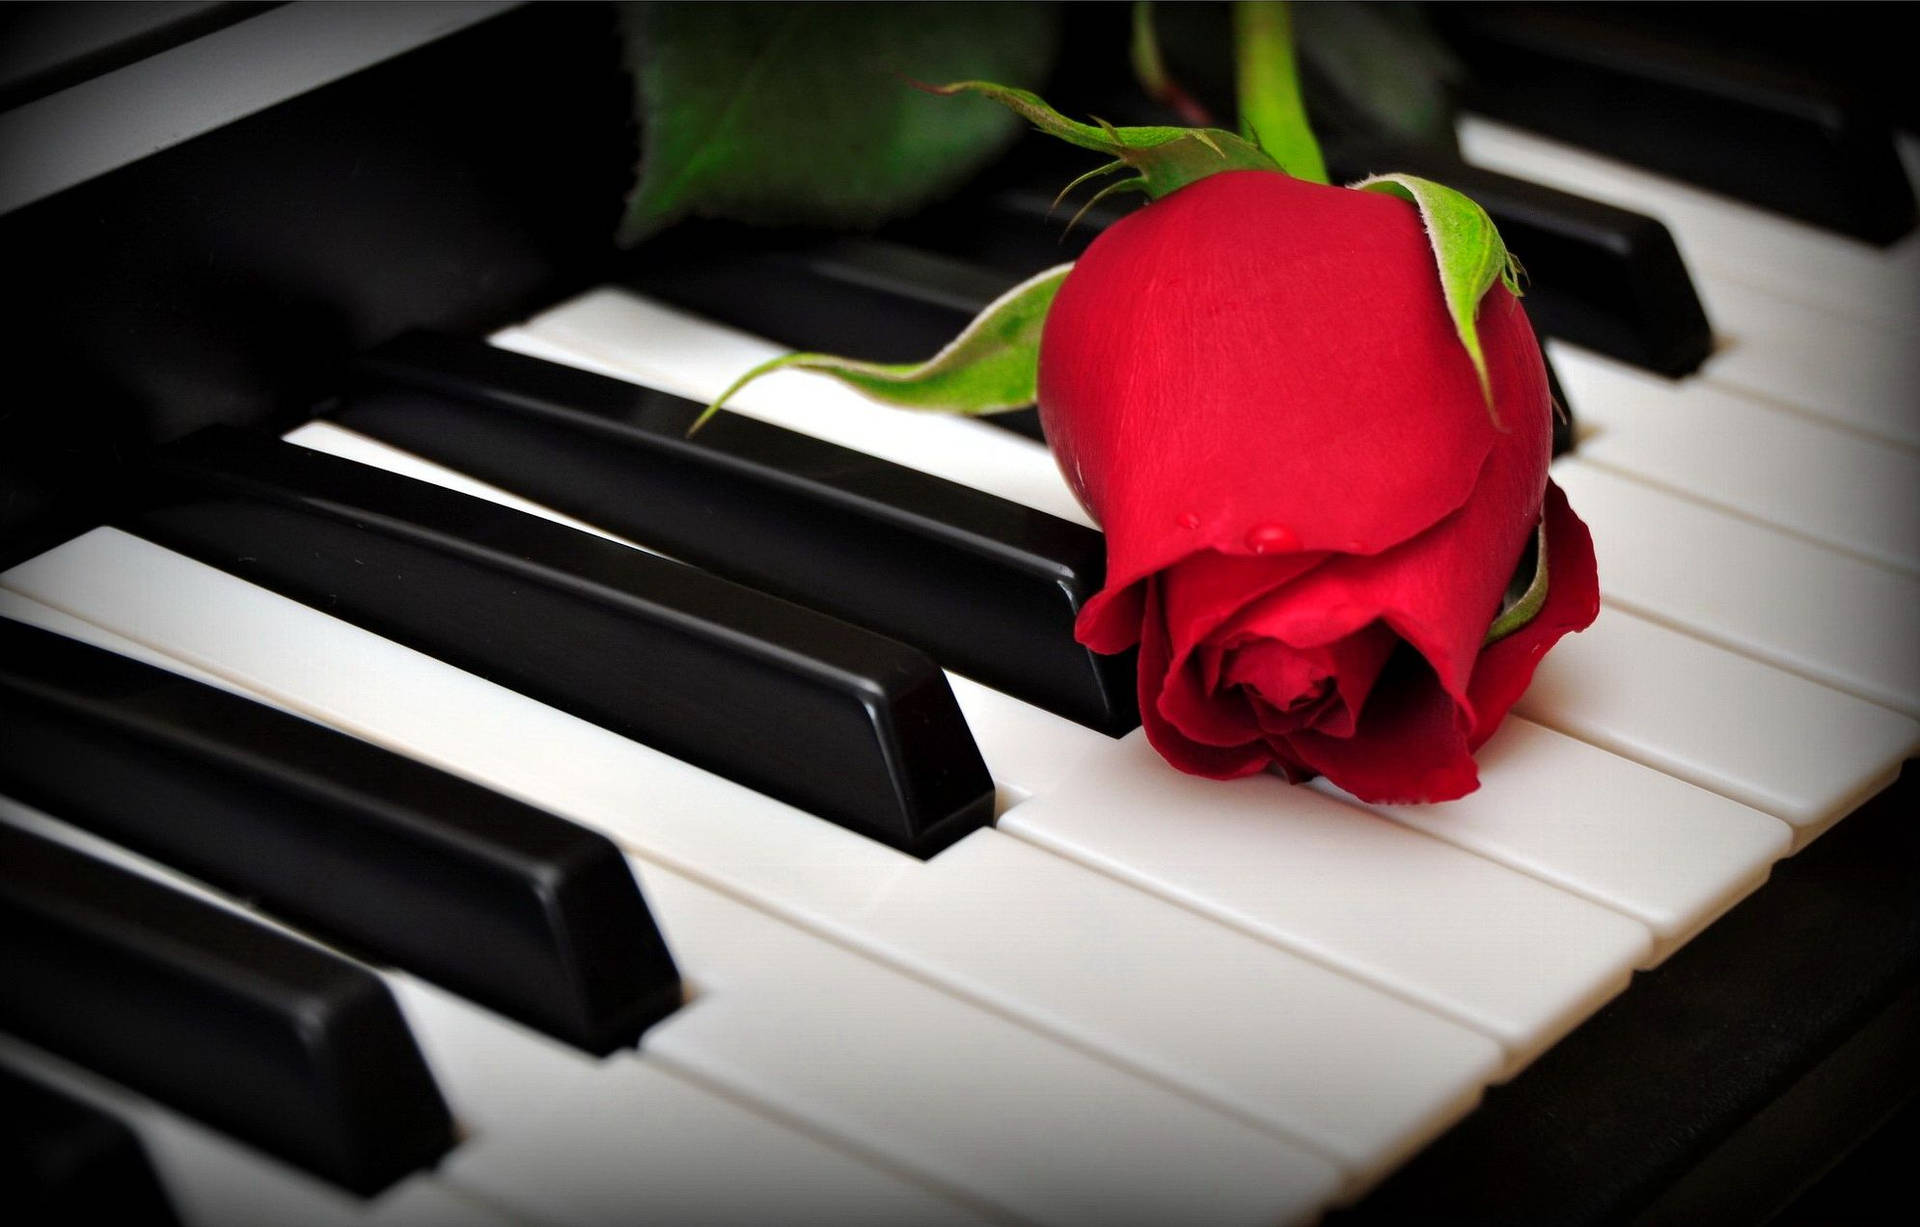 Free Piano Pictures , [300+] Piano Pictures for FREE | Wallpapers.com